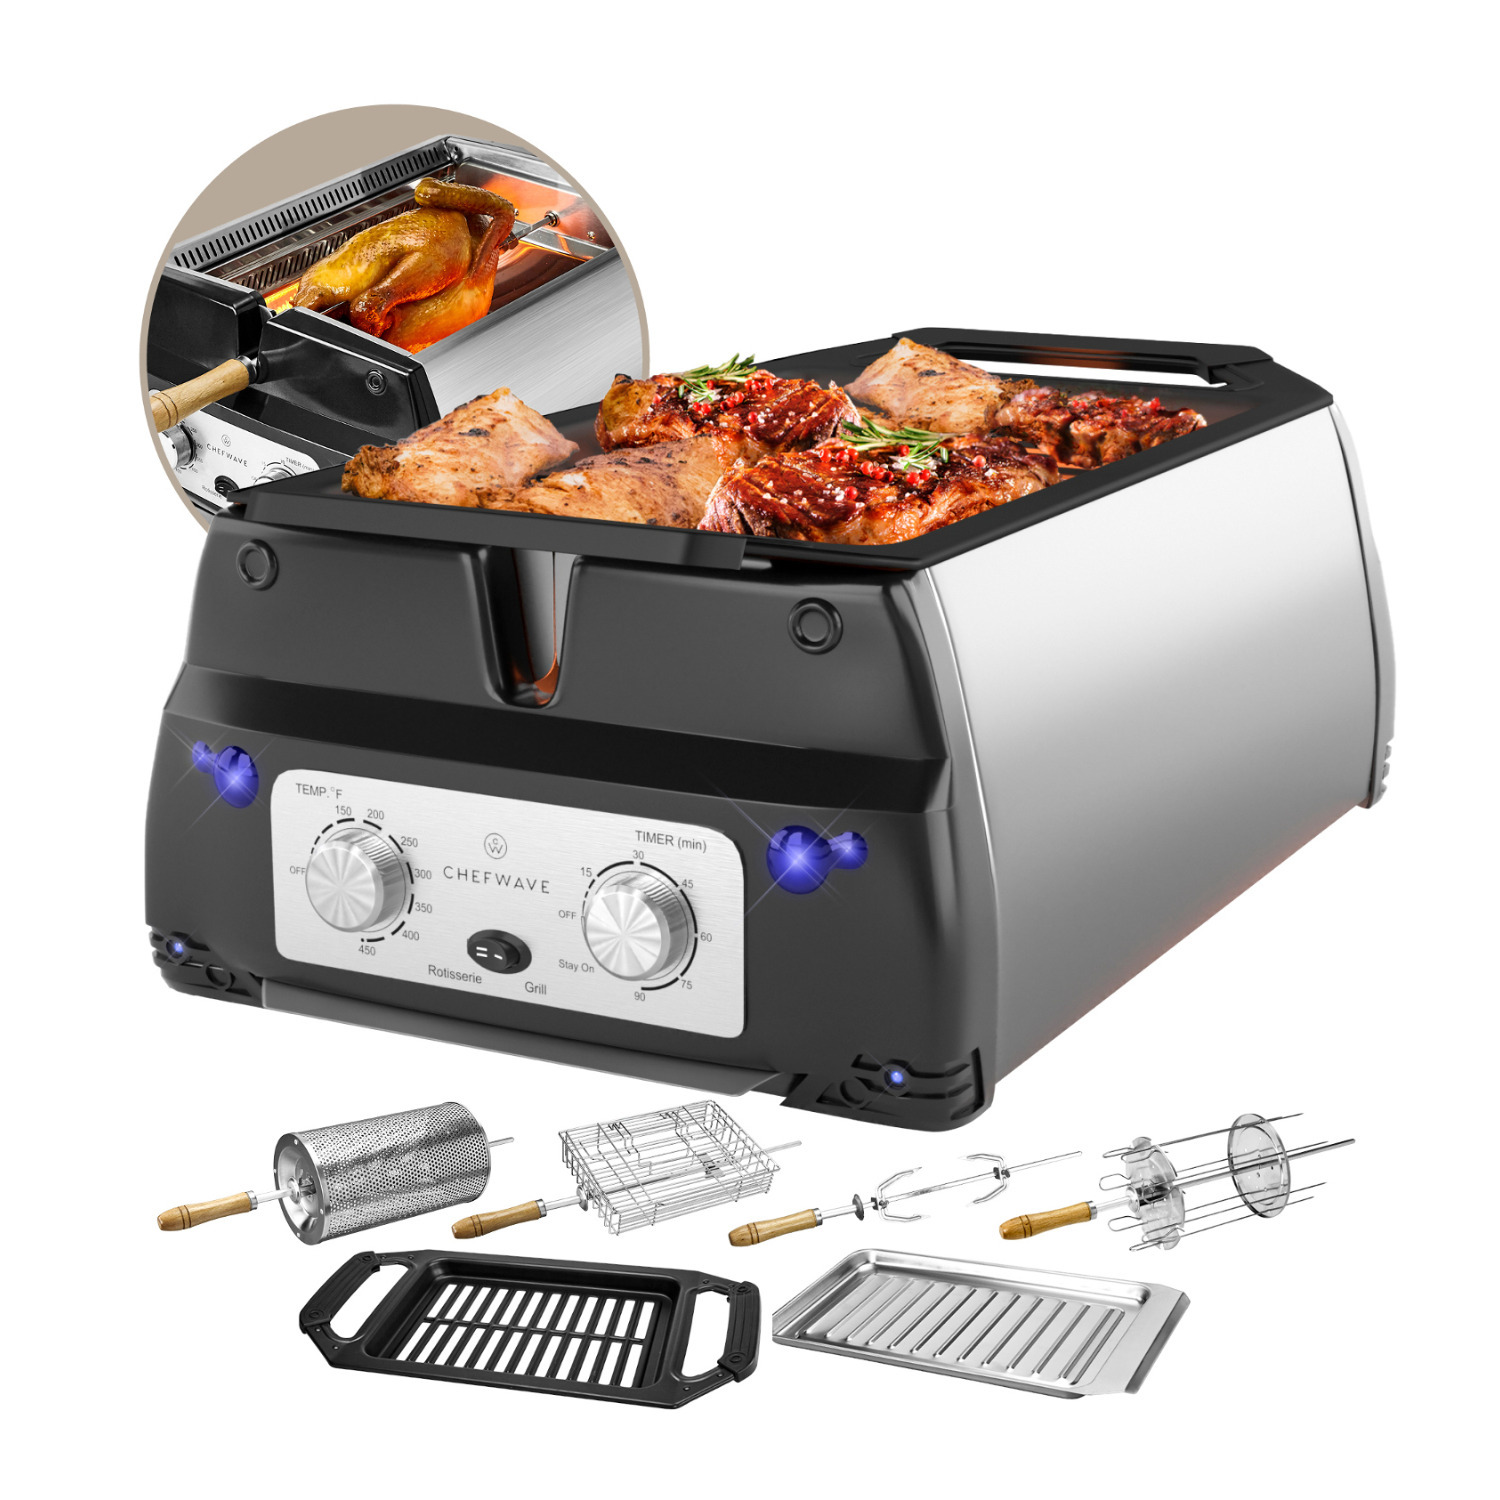 ChefWave Sosaku Smokeless Infrared Rotisserie Indoor Tabletop Grill - image 1 of 17